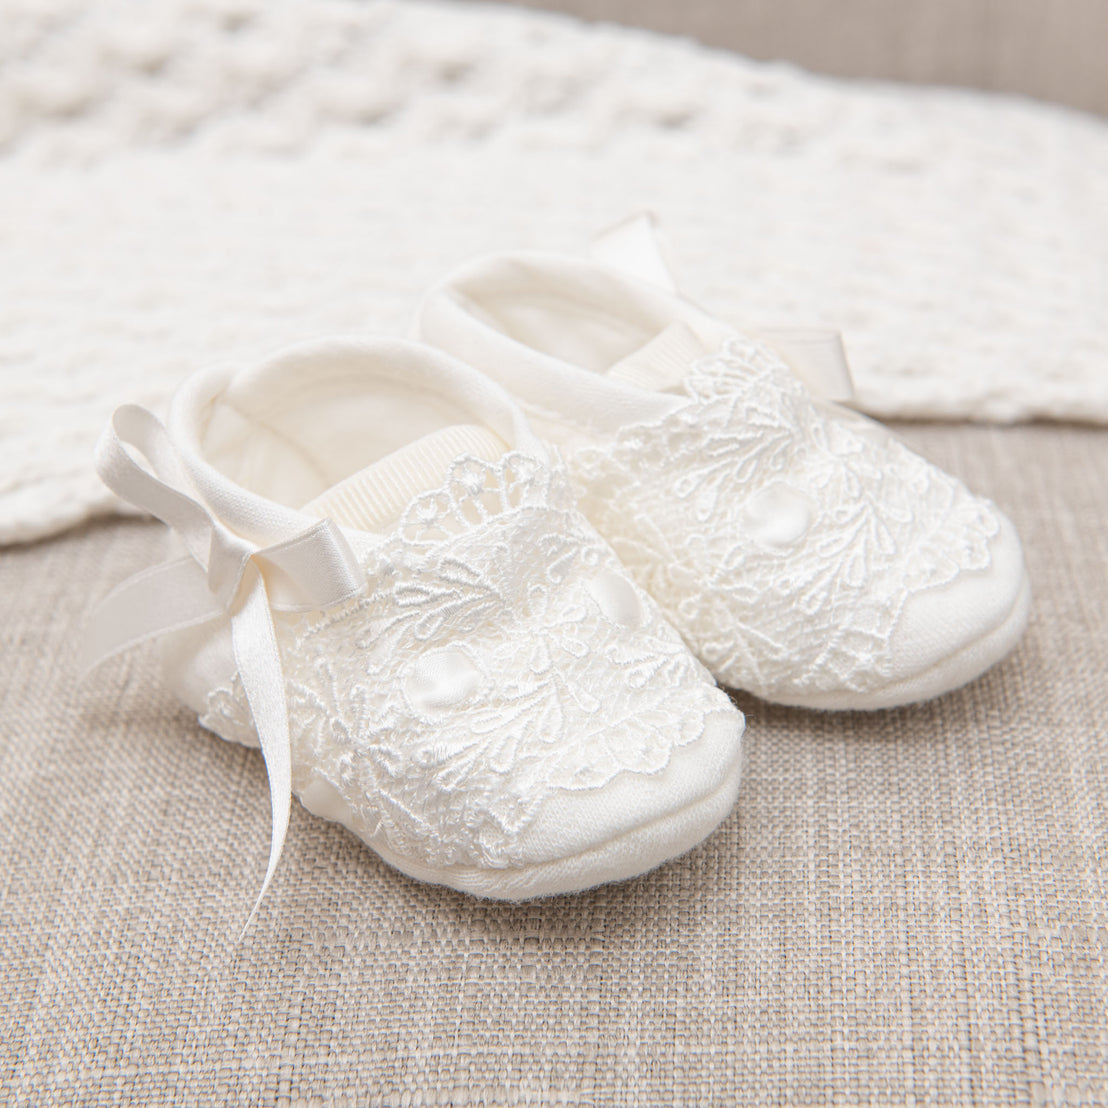 A Madeline Pair of Booties  with satin ribbons, perfect as a boutique baby gift, on a beige textured fabric background.